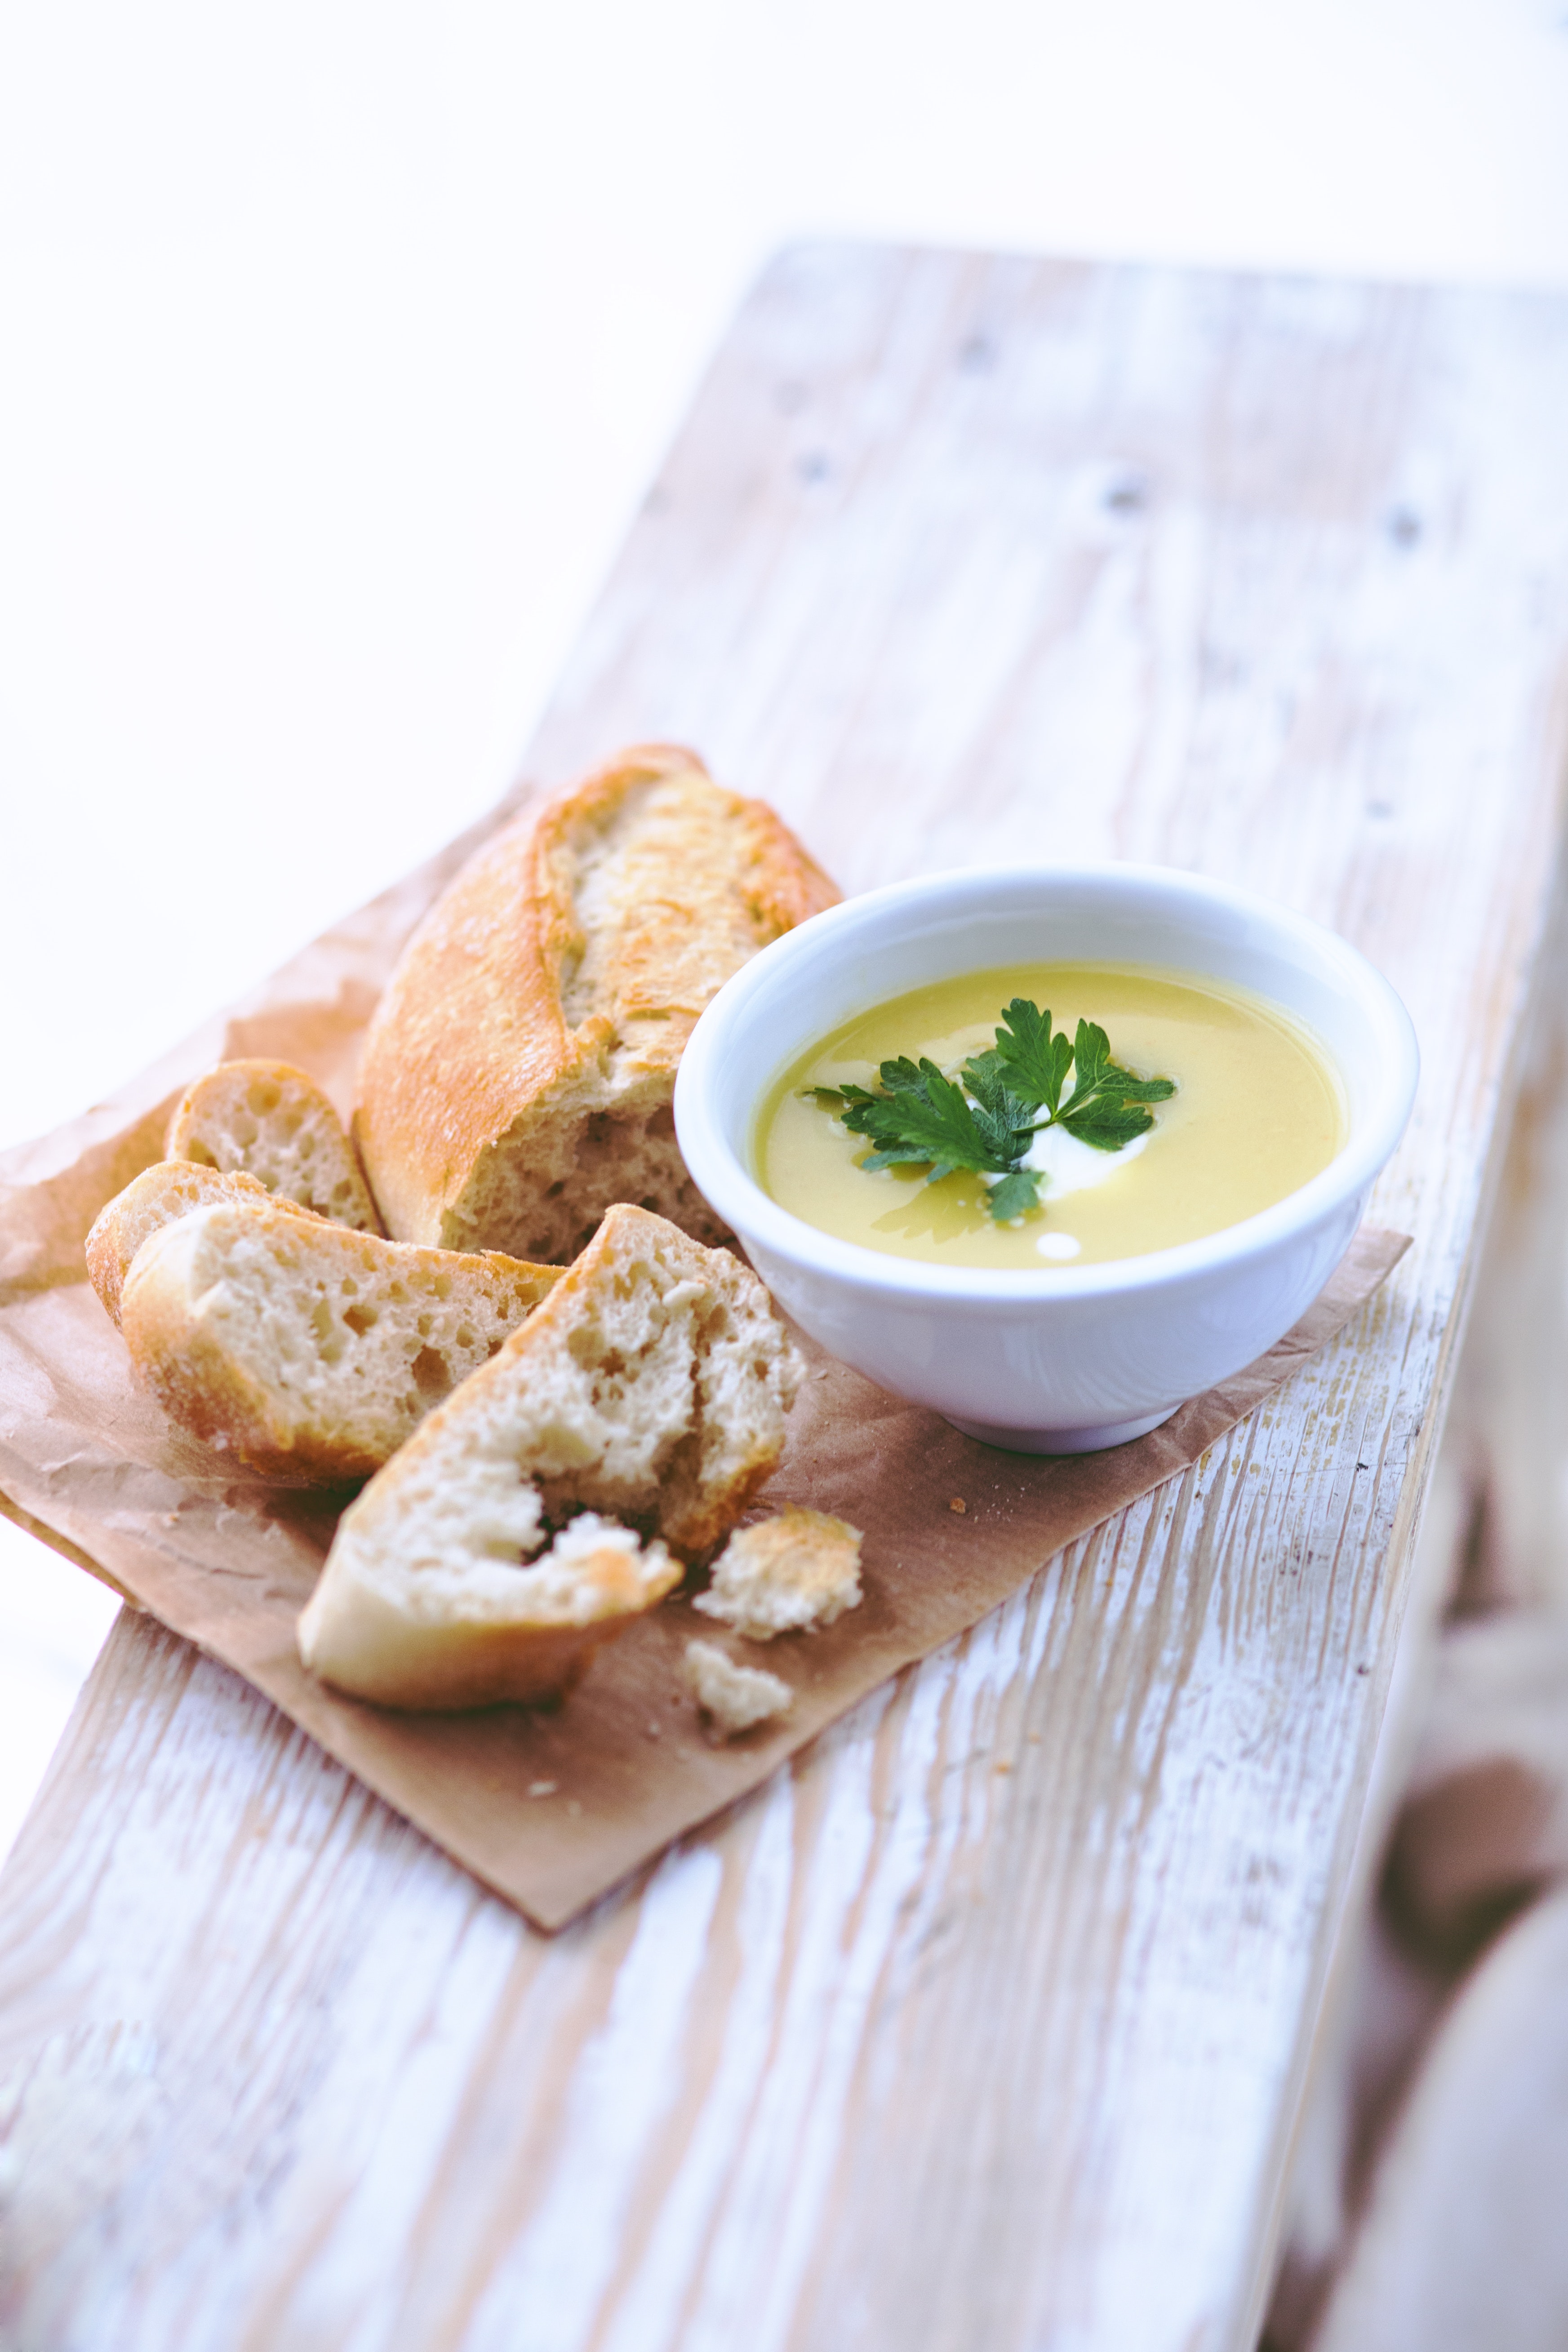 Leek and potato soup with bread photo